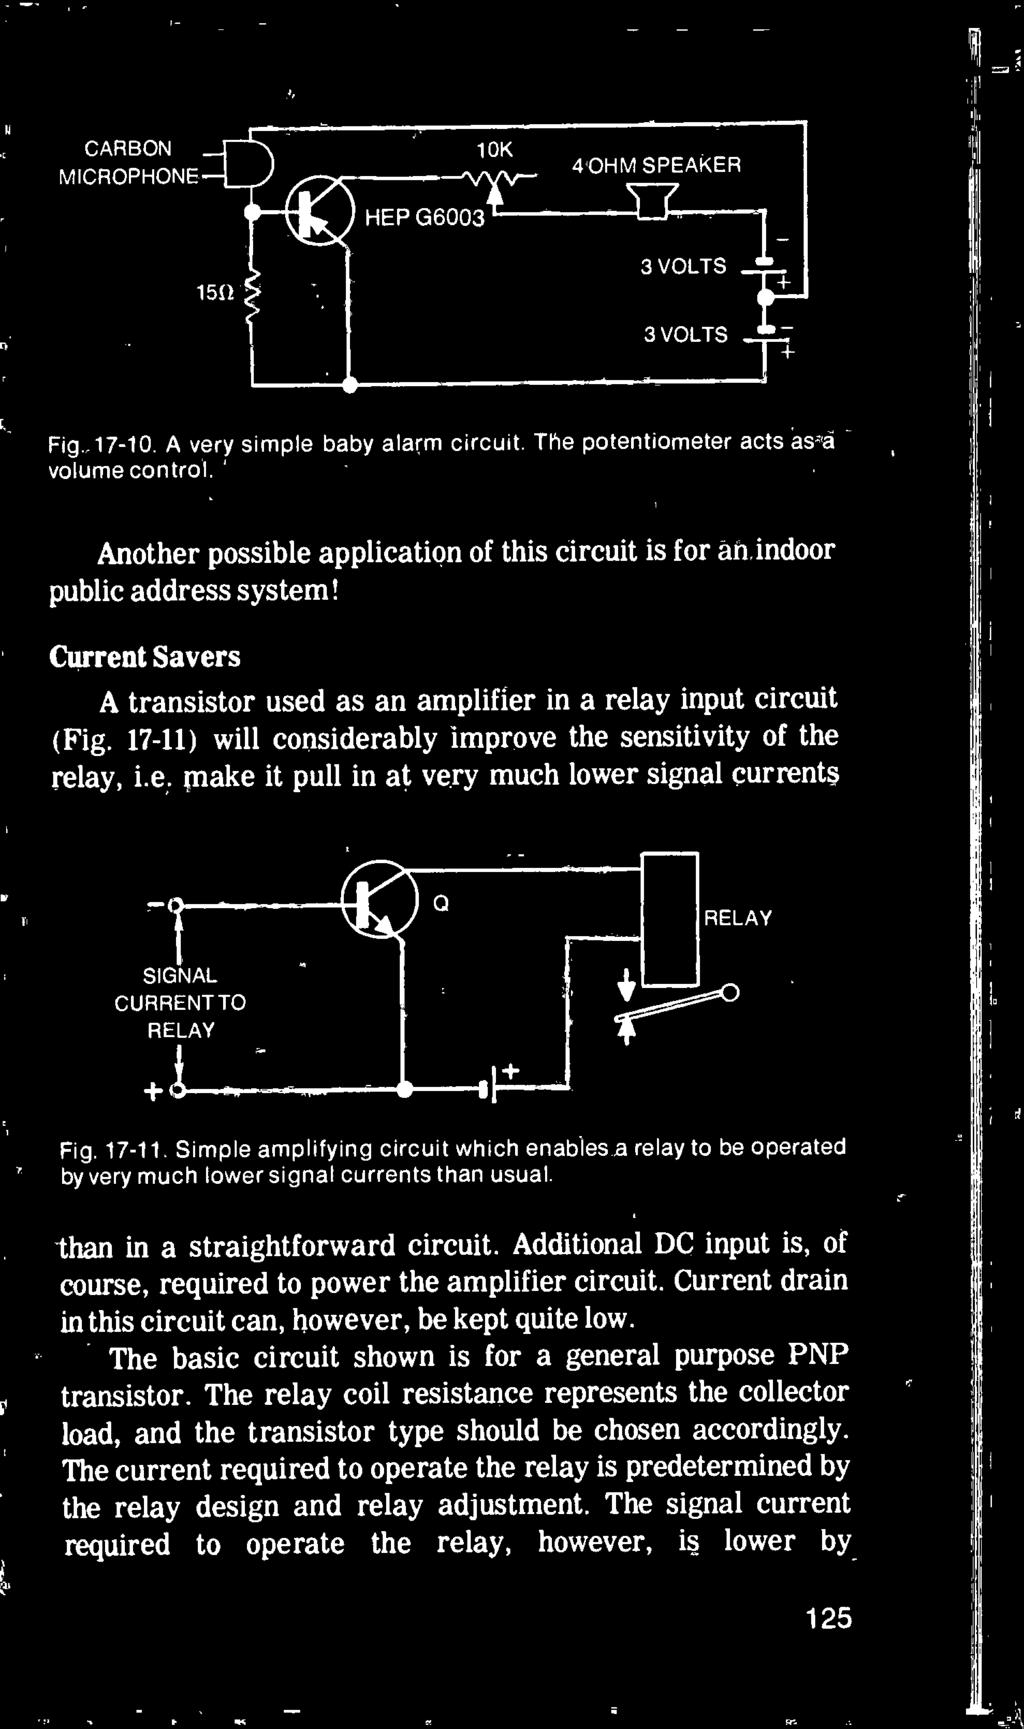 Additional DC input is, of course, required to power the amplifier circuit. Current drain in this circuit can, however, be kept quite low.